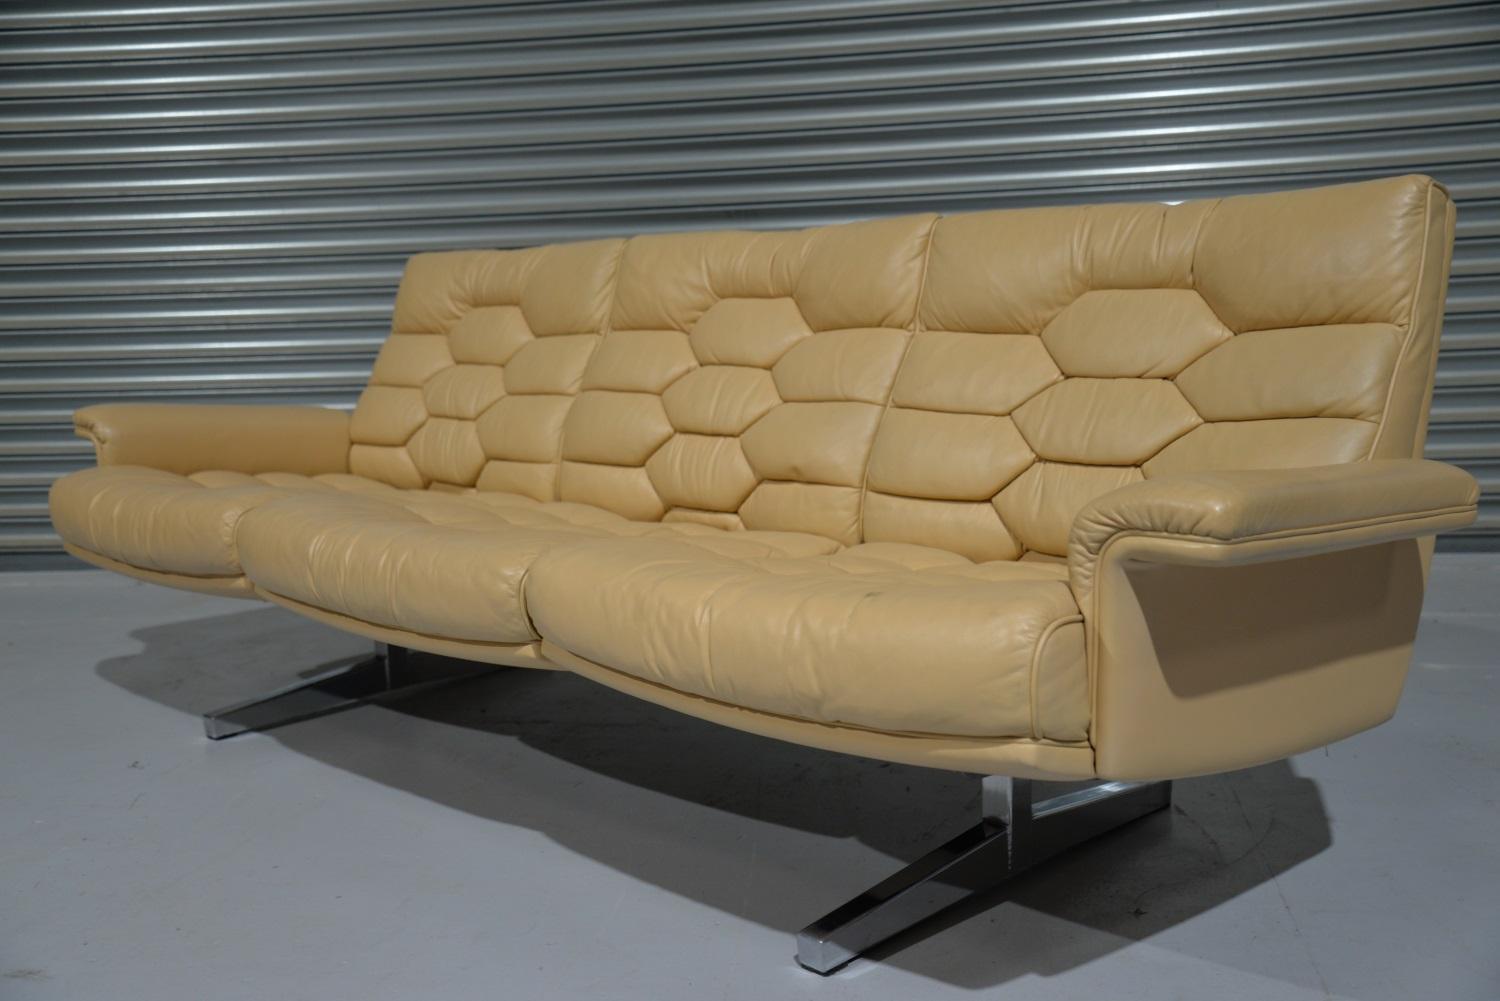 We are delighted to bring to you a beautiful rare three-seat sofa from De Sede of Switzerland. Designed by Robert Haussmann this DS-P model has a unique honeycomb seating structure. Making this piece extremely comfortable and brought to you cream